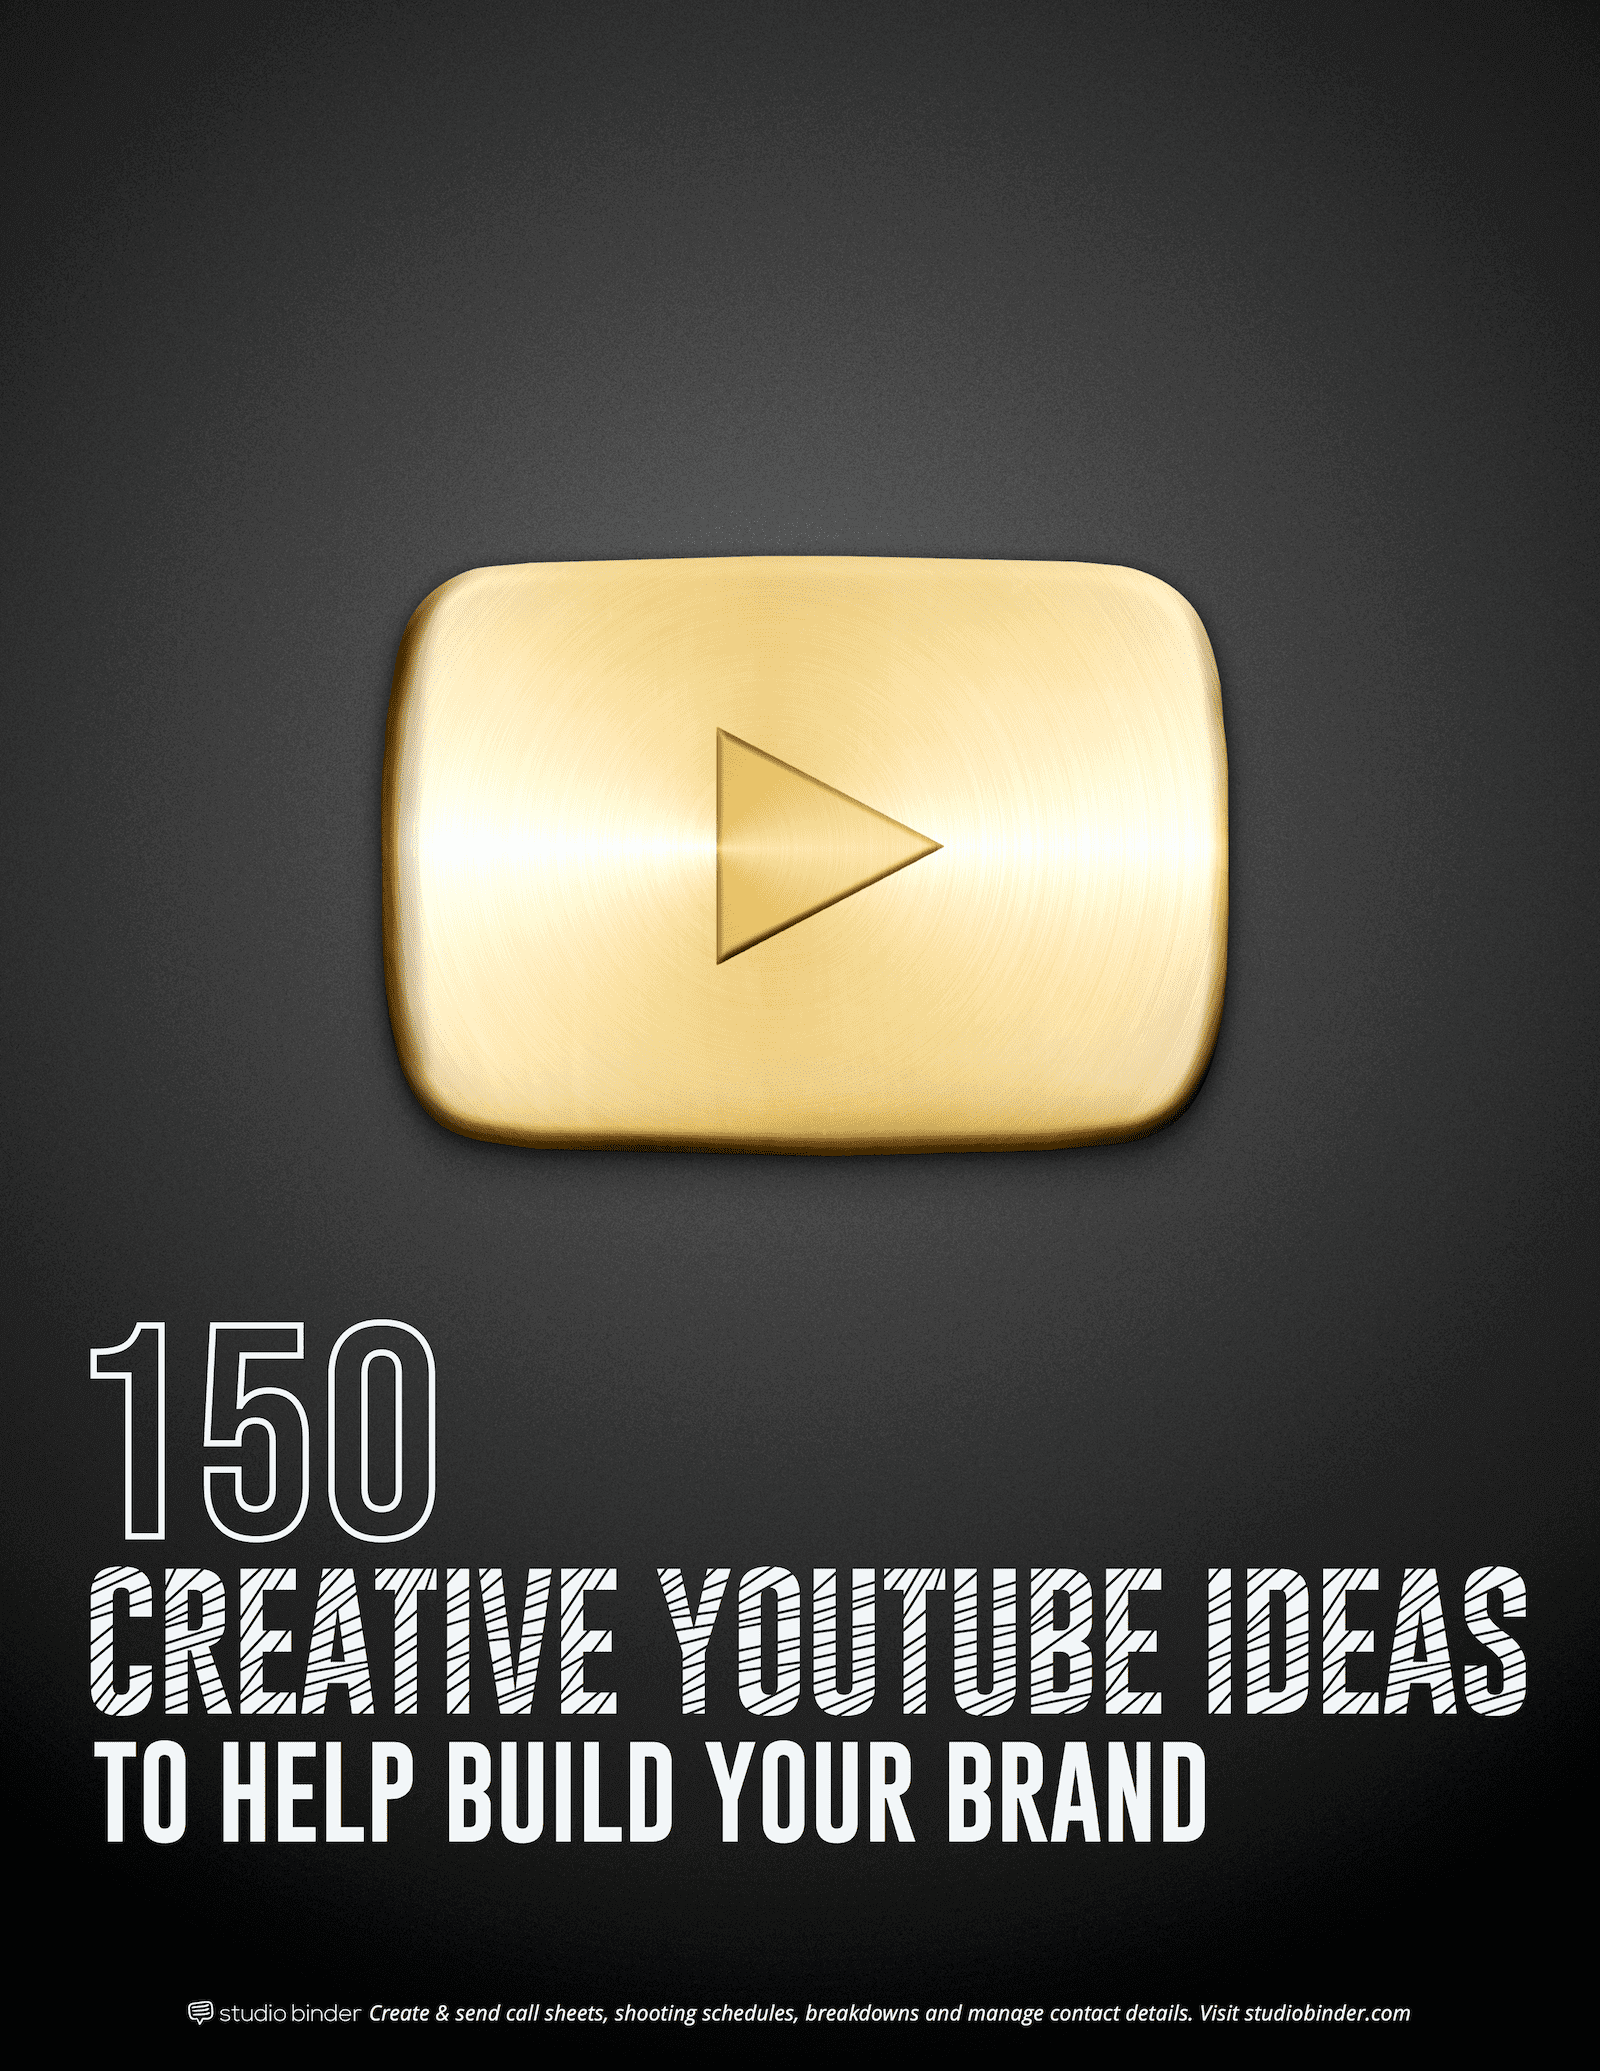 Top 5 Youtube Channel Ideas for Beginners  PhoneWorld